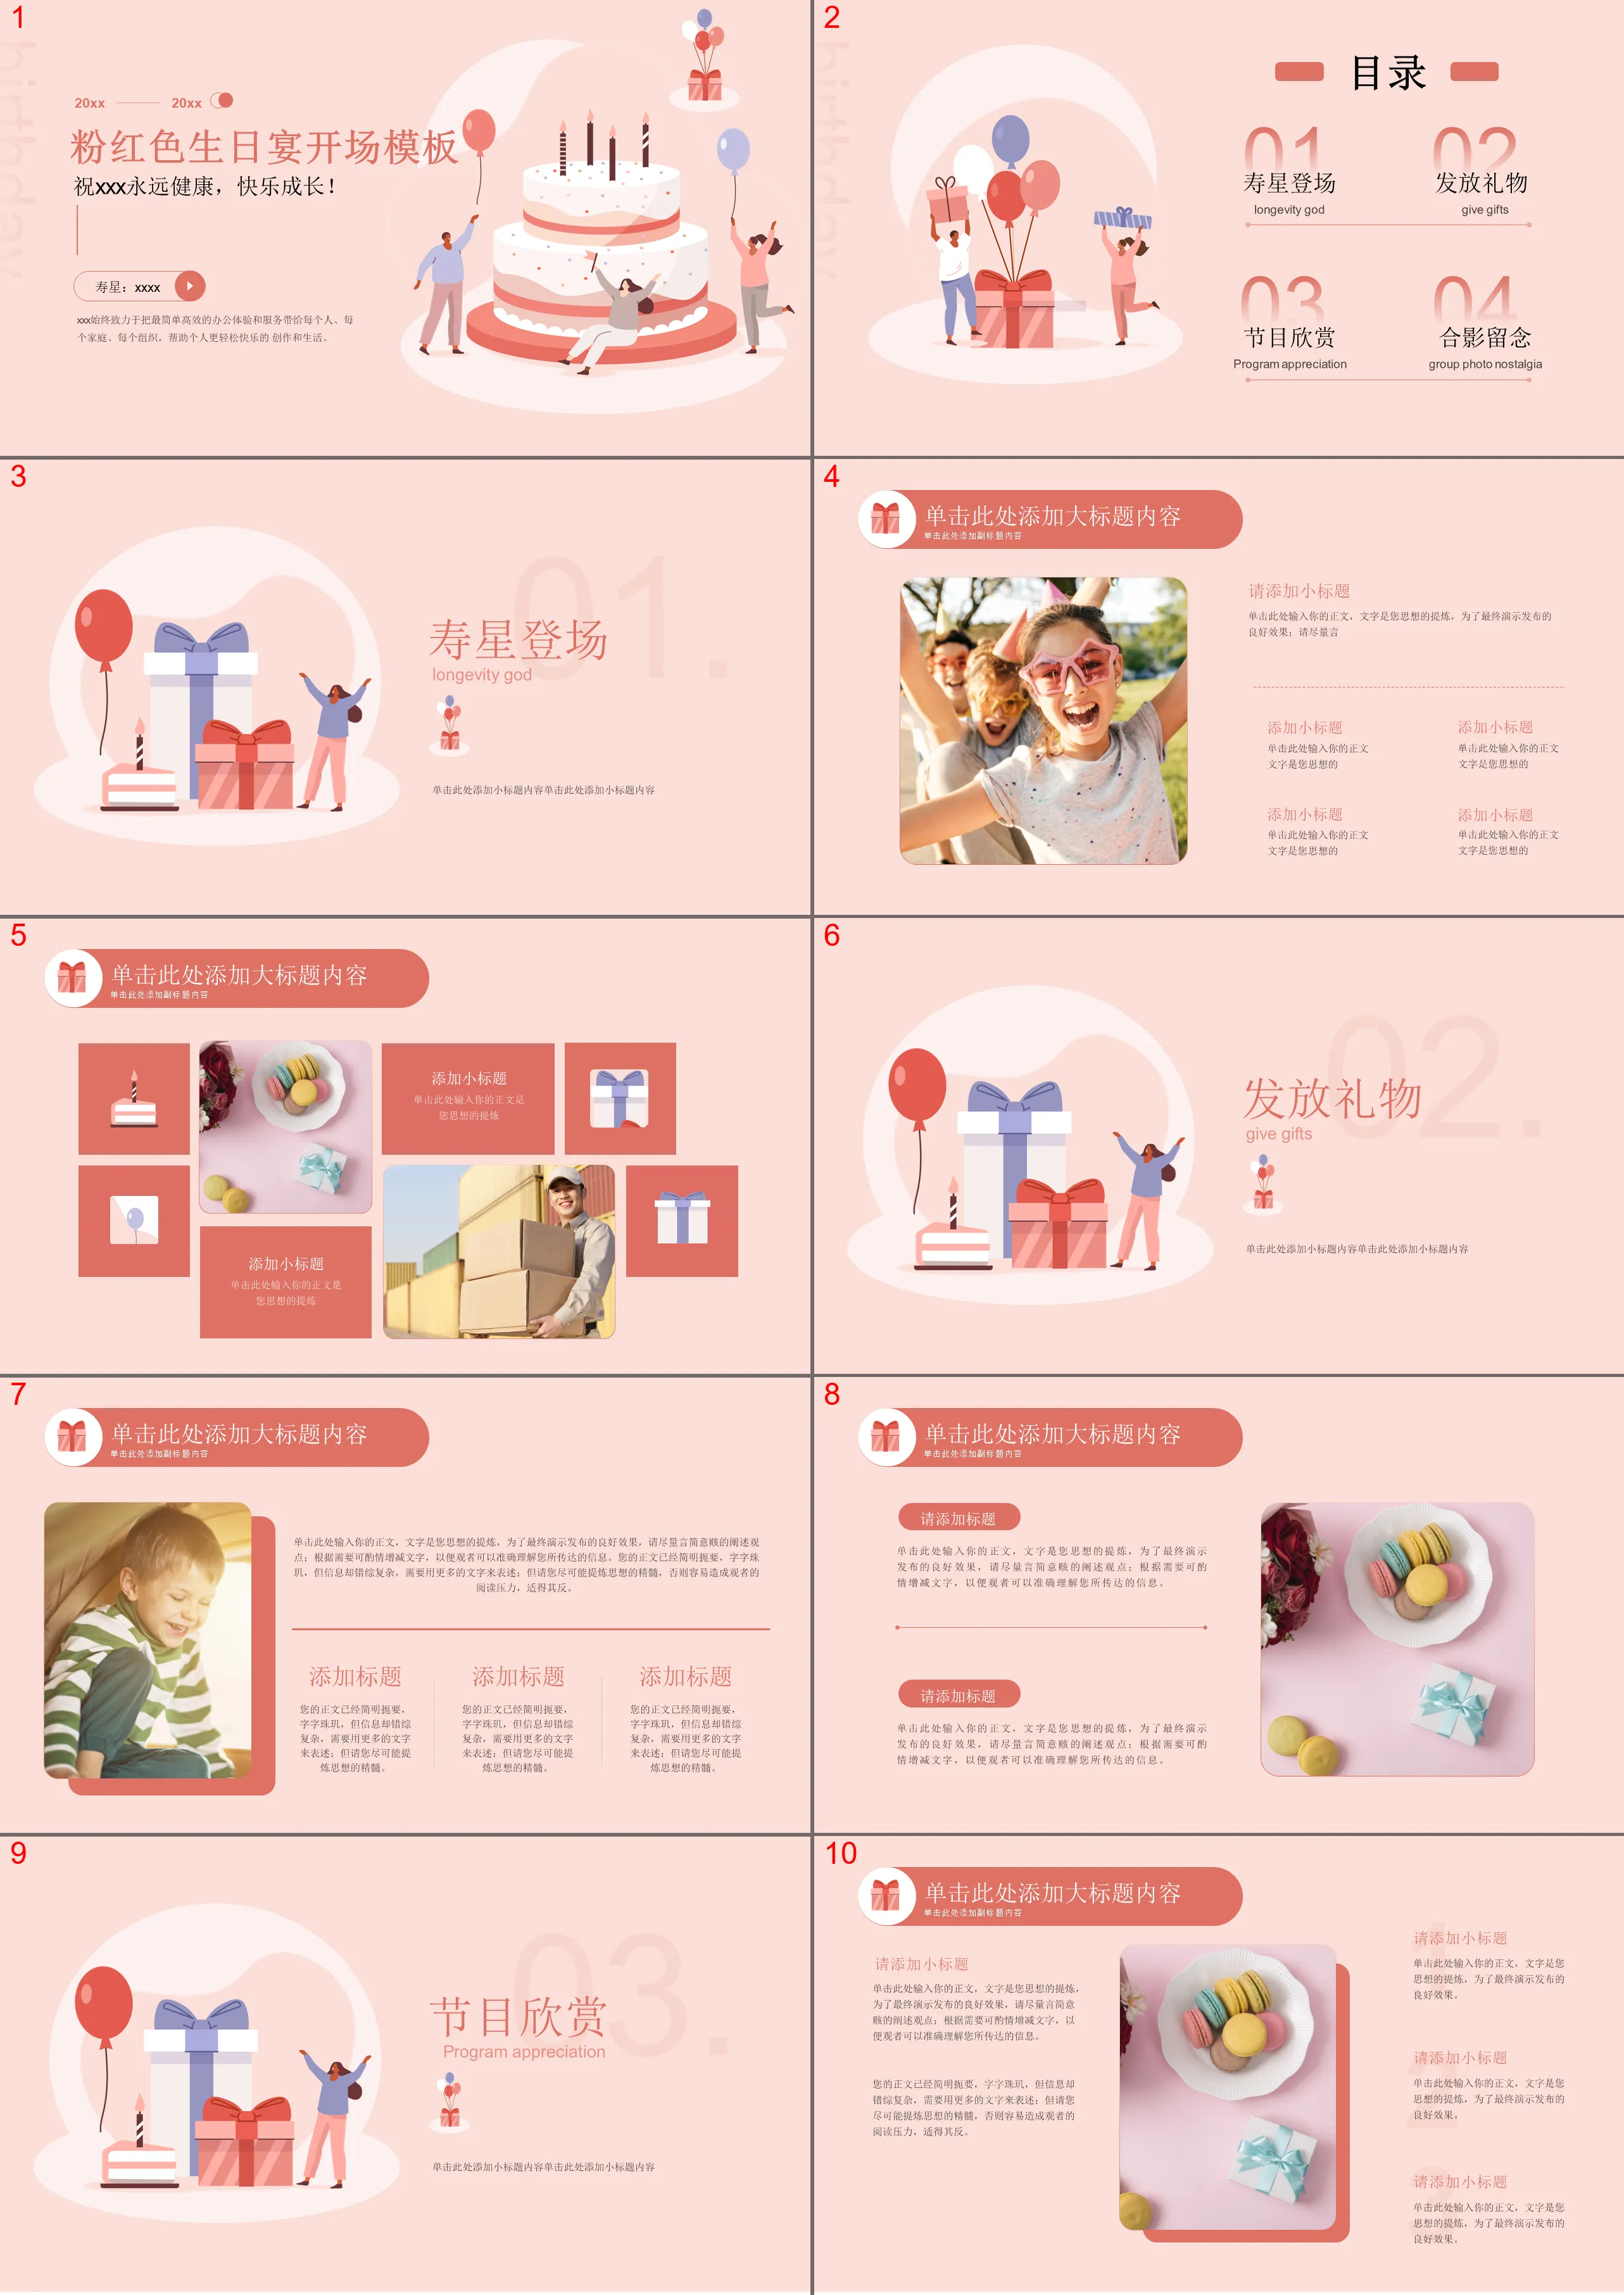 BIRTHDAY Pink Birthday Party Opening Template XXX has always been committed to bringing the simplest and most efficient office experience and services to everyone, every family, and every organization, helping individuals to create and live more easily an